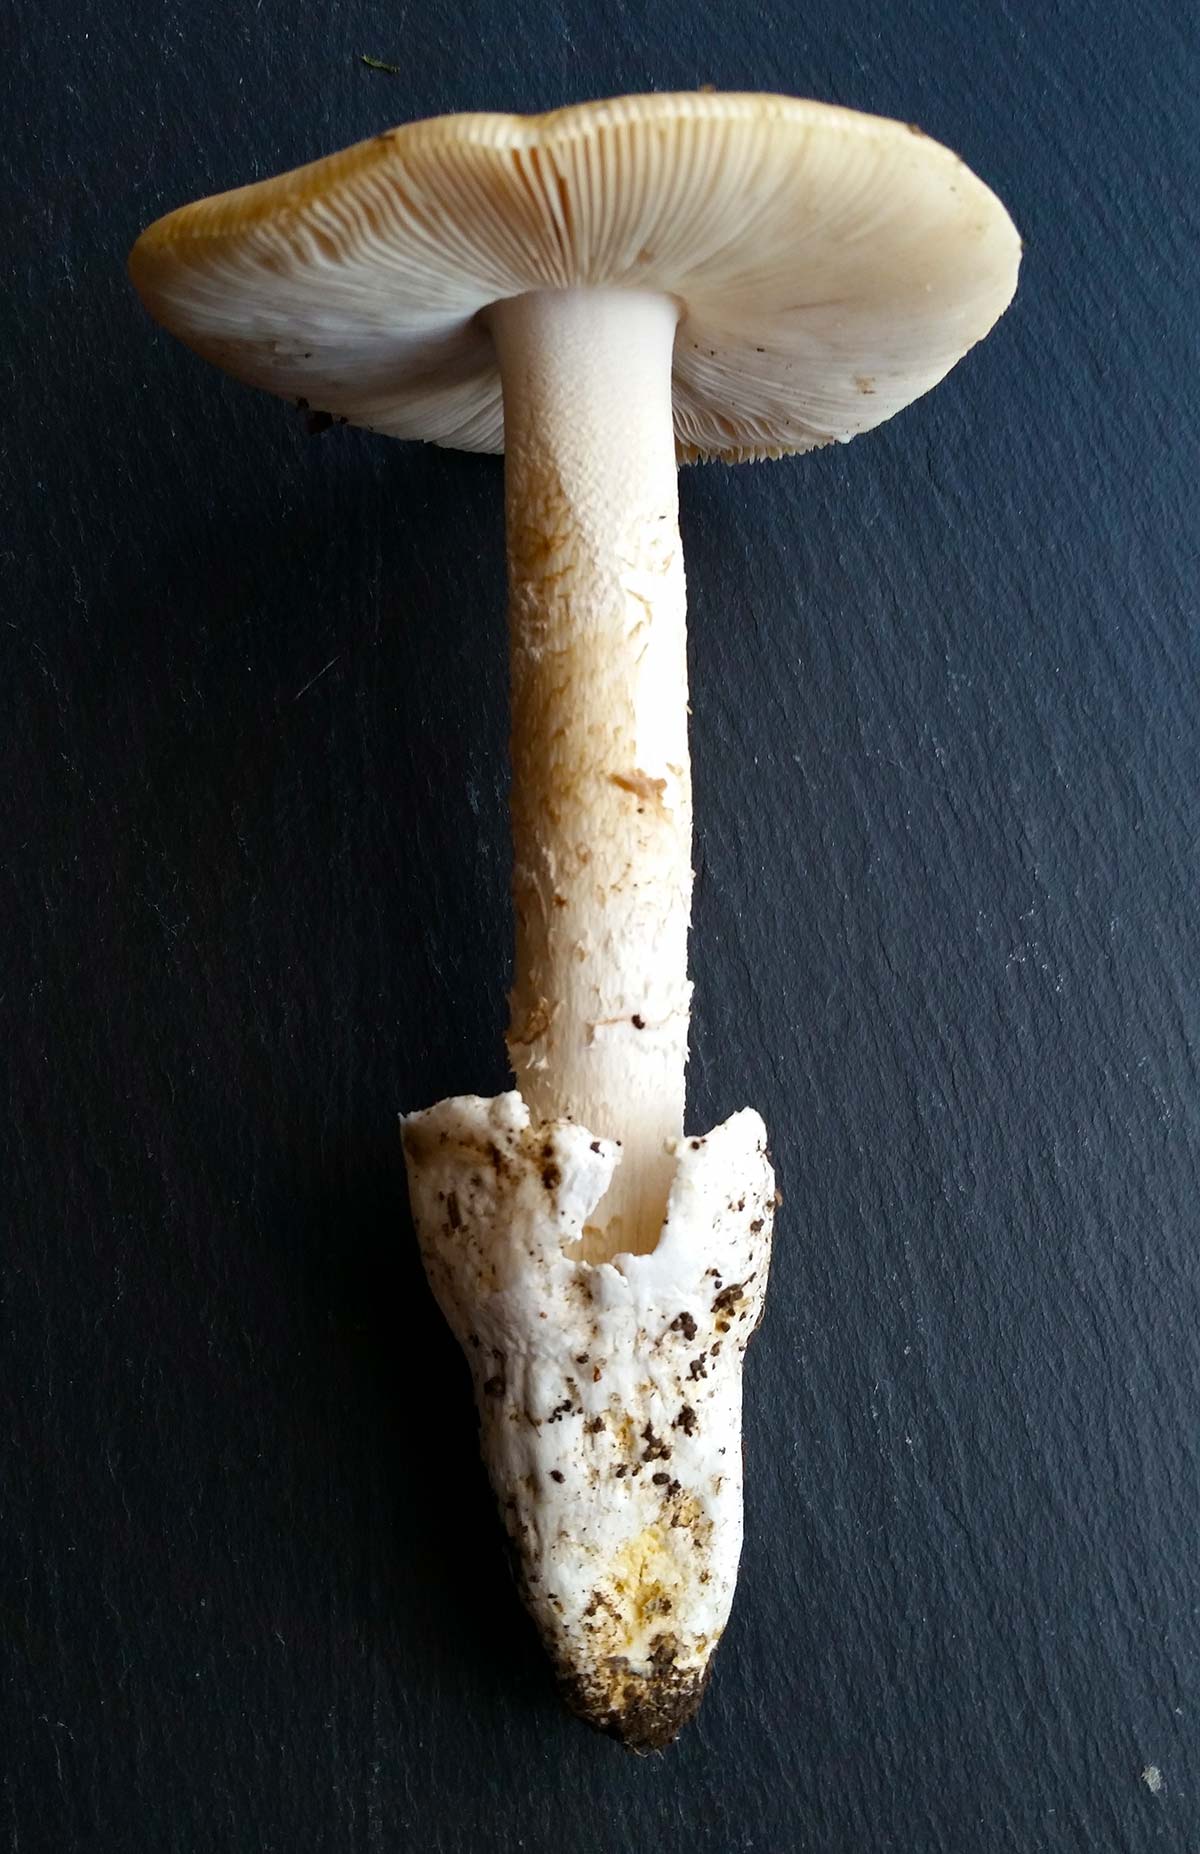 Amanita velosa side view with egg remnant